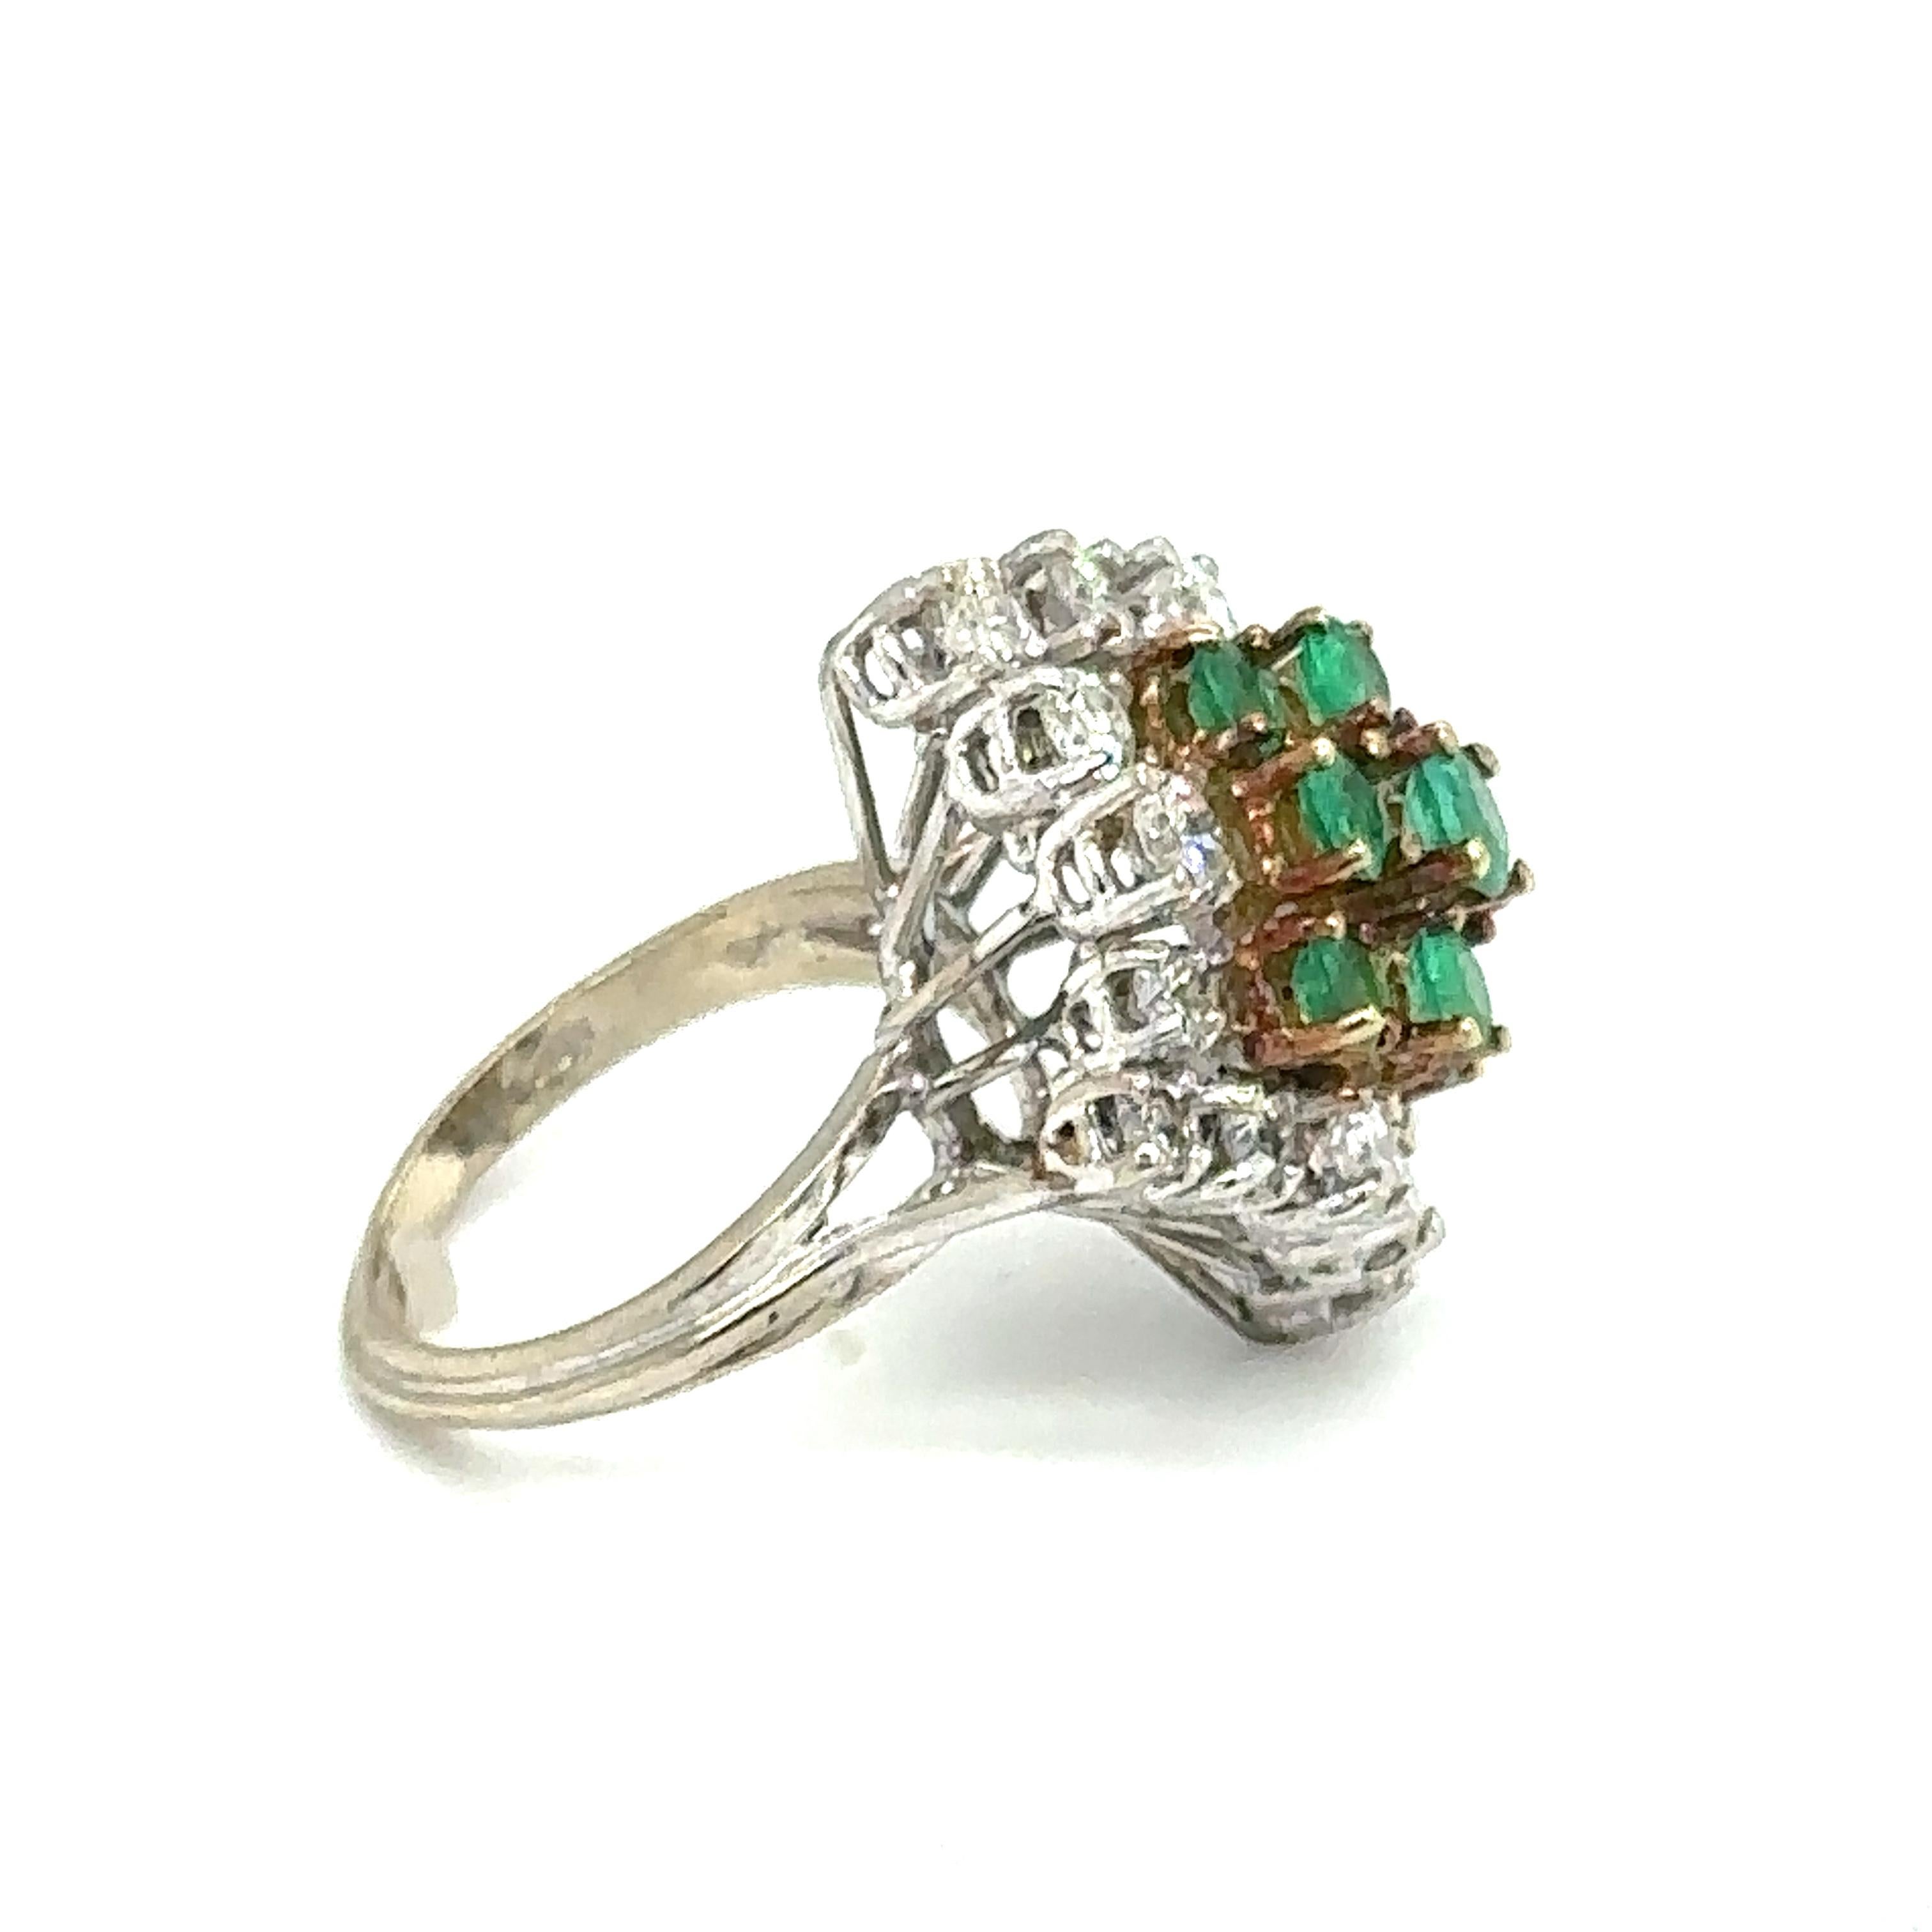 Emerald and Diamond Cocktail Ring in 14 Karat White Gold, circa 1950s For Sale 1